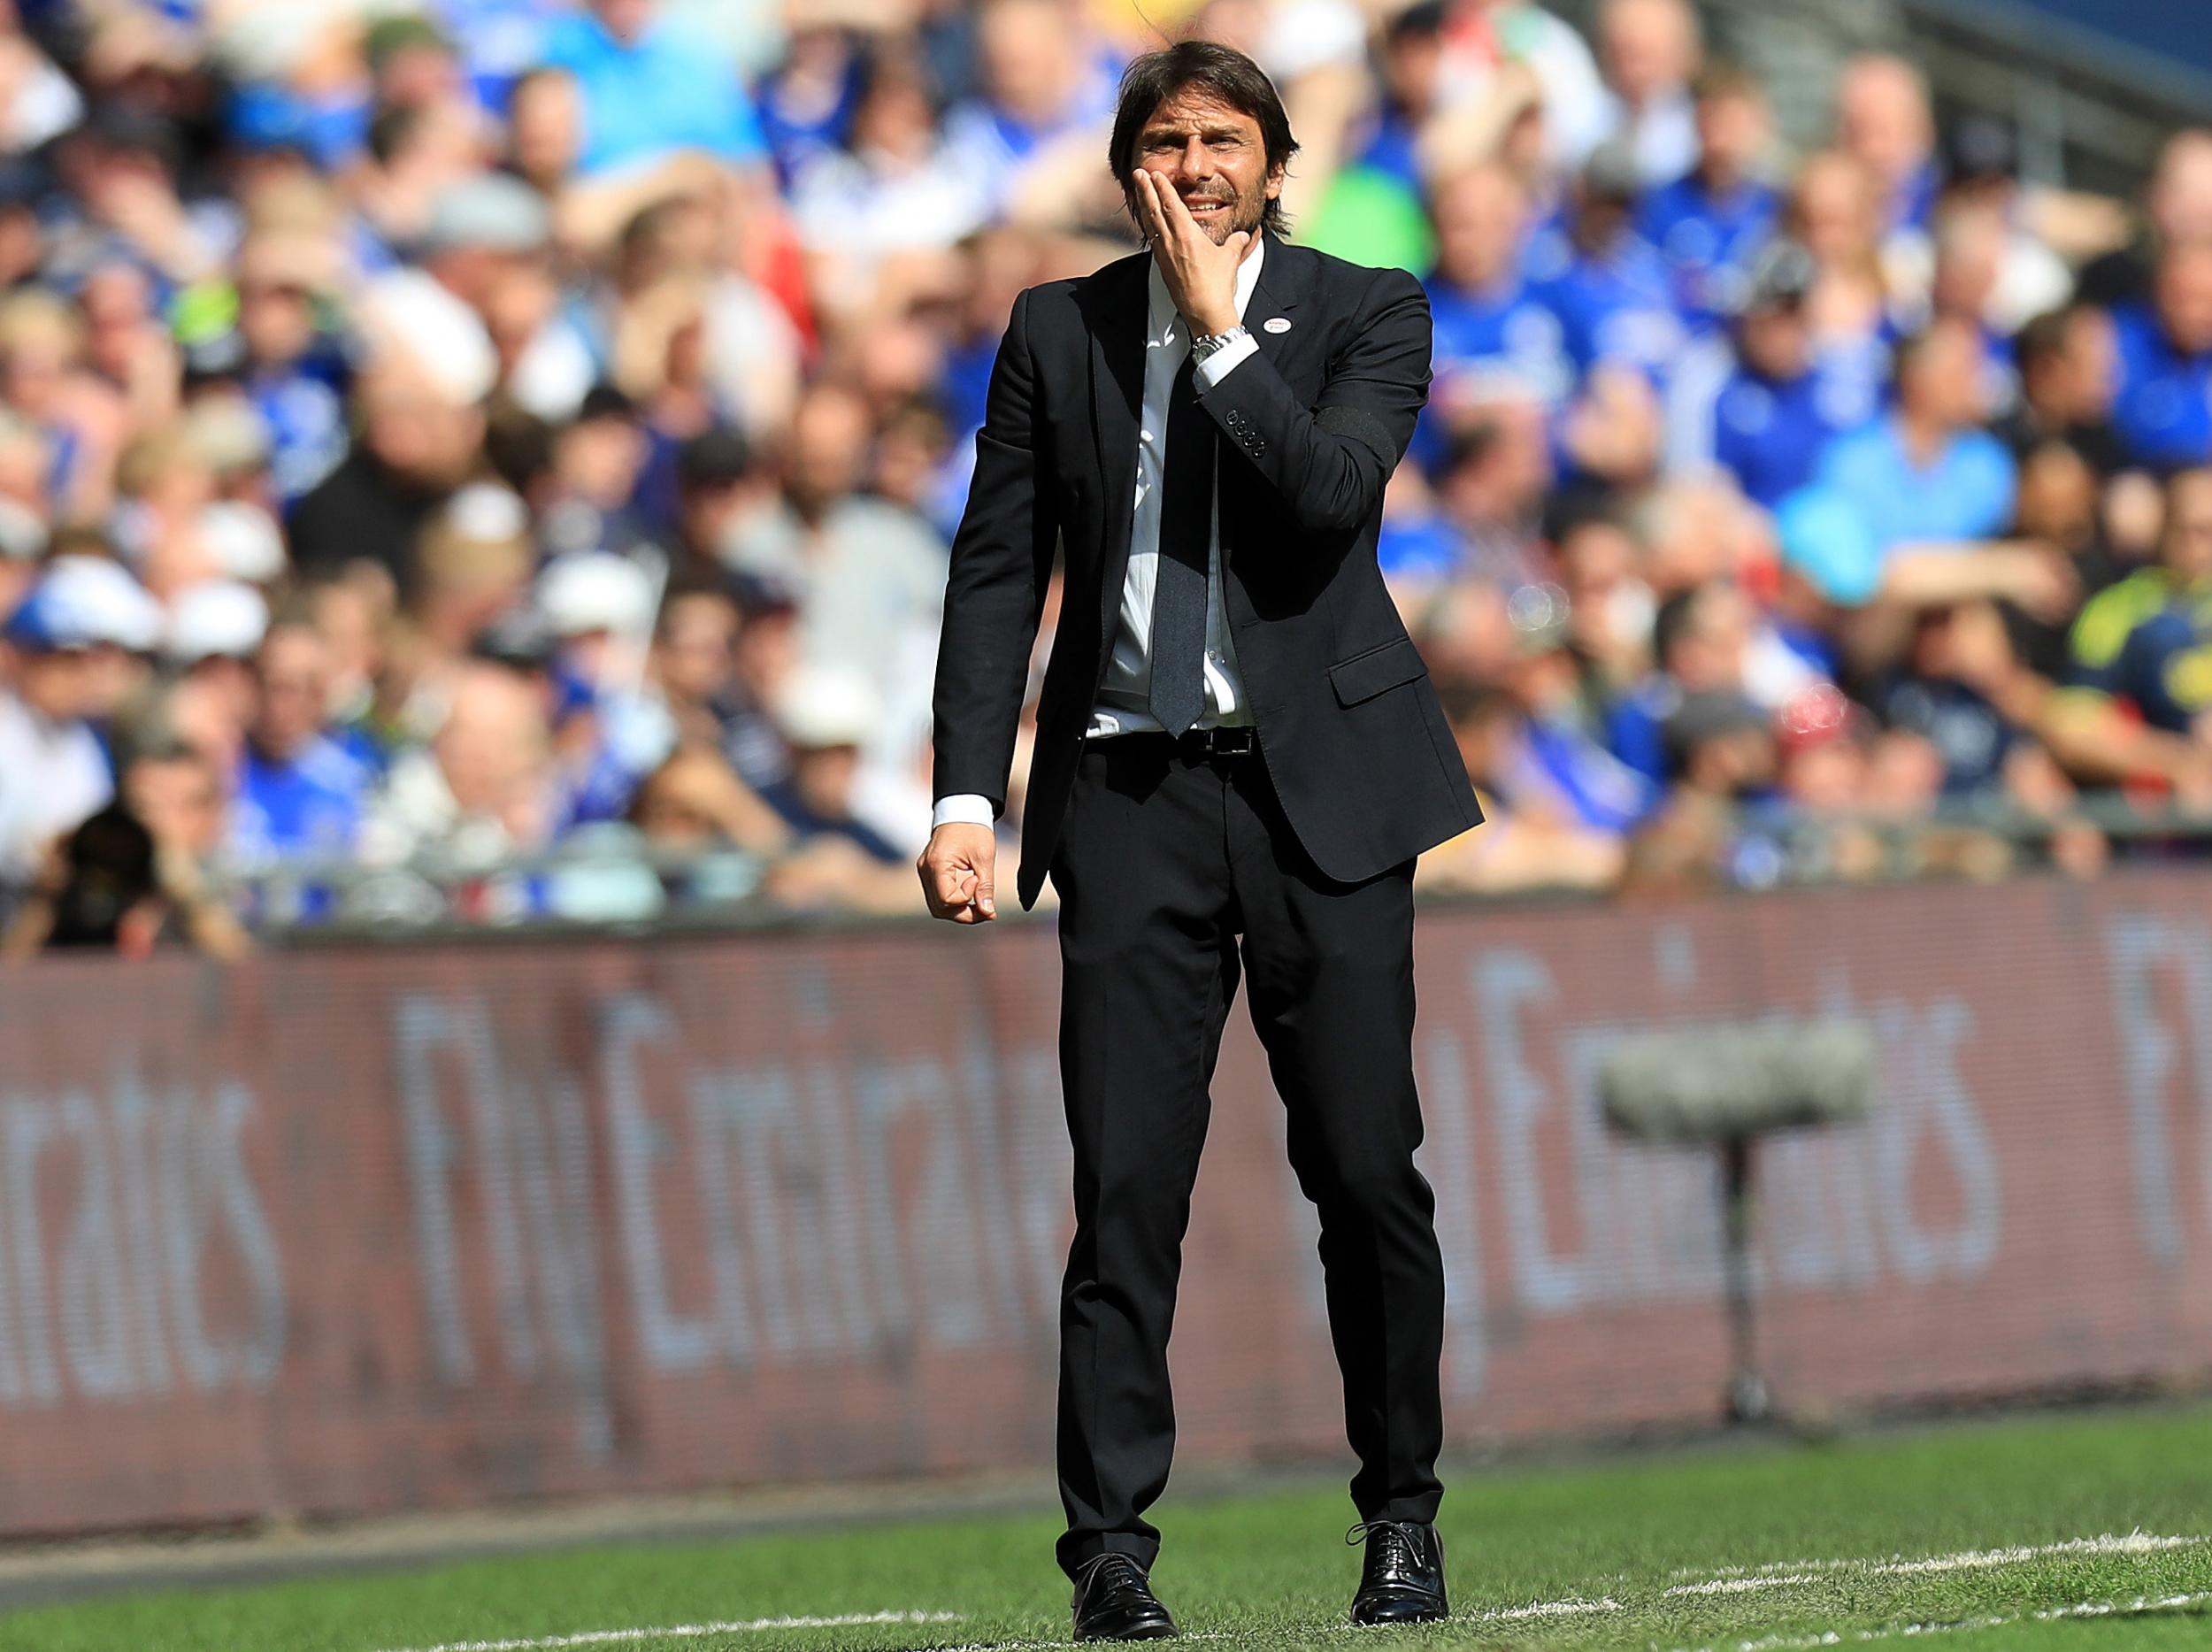 Antonio Conte has reached the FA Cup final once again